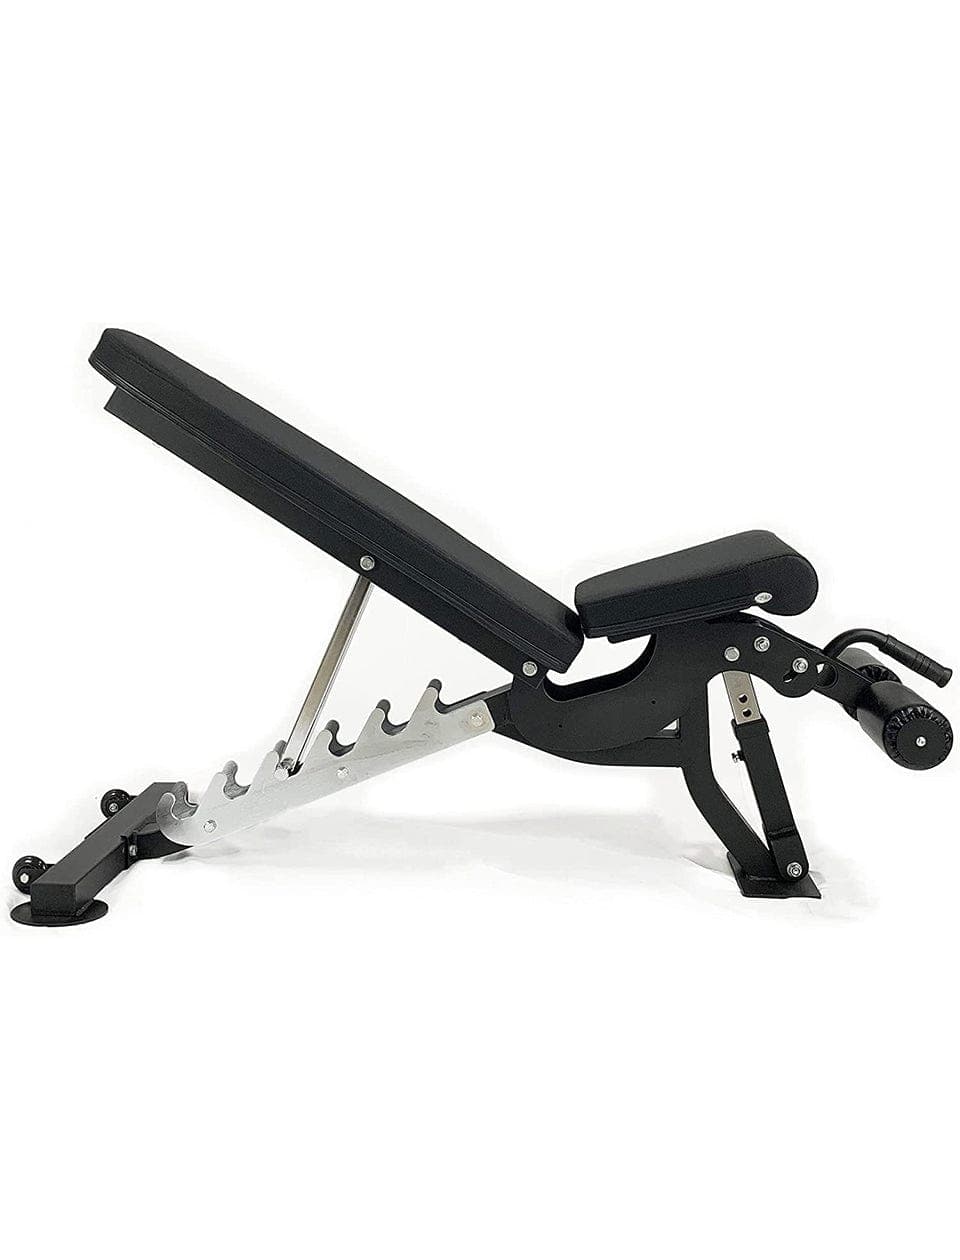 PRSAE Benches & Racks 1441 Fitness Heavy Duty Adjustable Bench A8007 - Flat / Incline / Decline